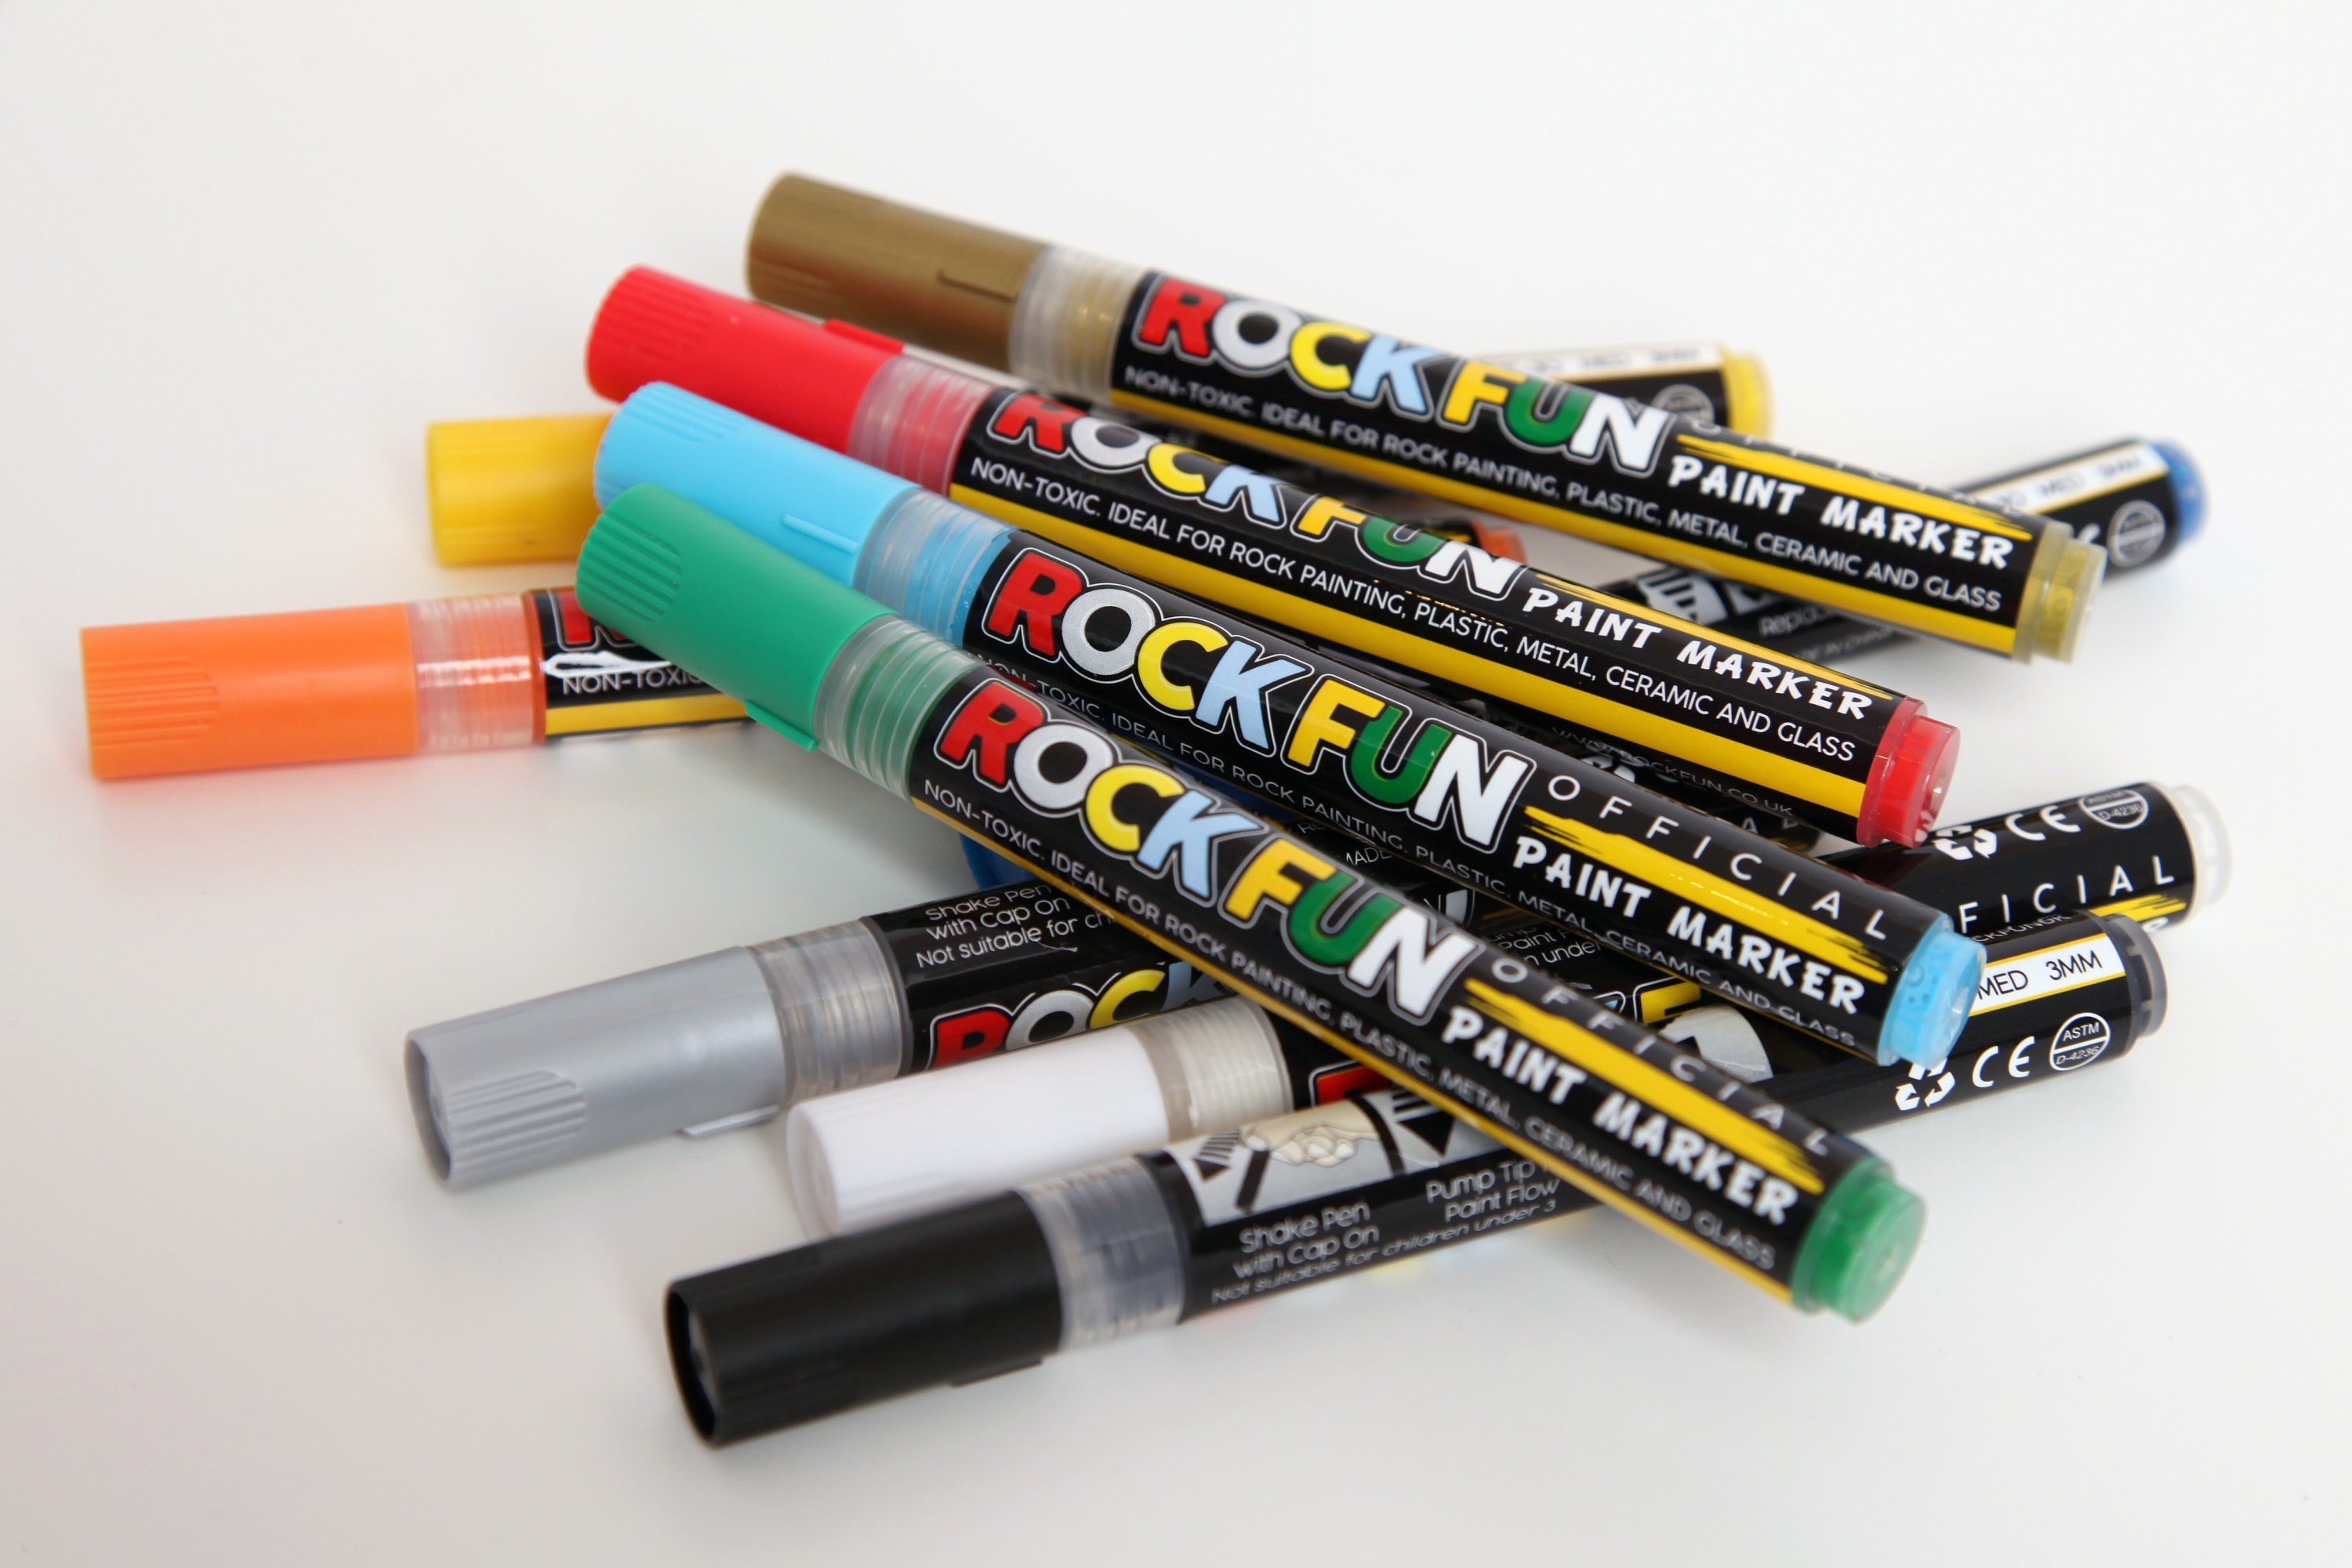 Posca PC-1M Extra Fine Paint Marker Pens 1mm Bullet Tip Nib Writes on Any  Surface Glass Stone Wood Metal Fabric Plastic 